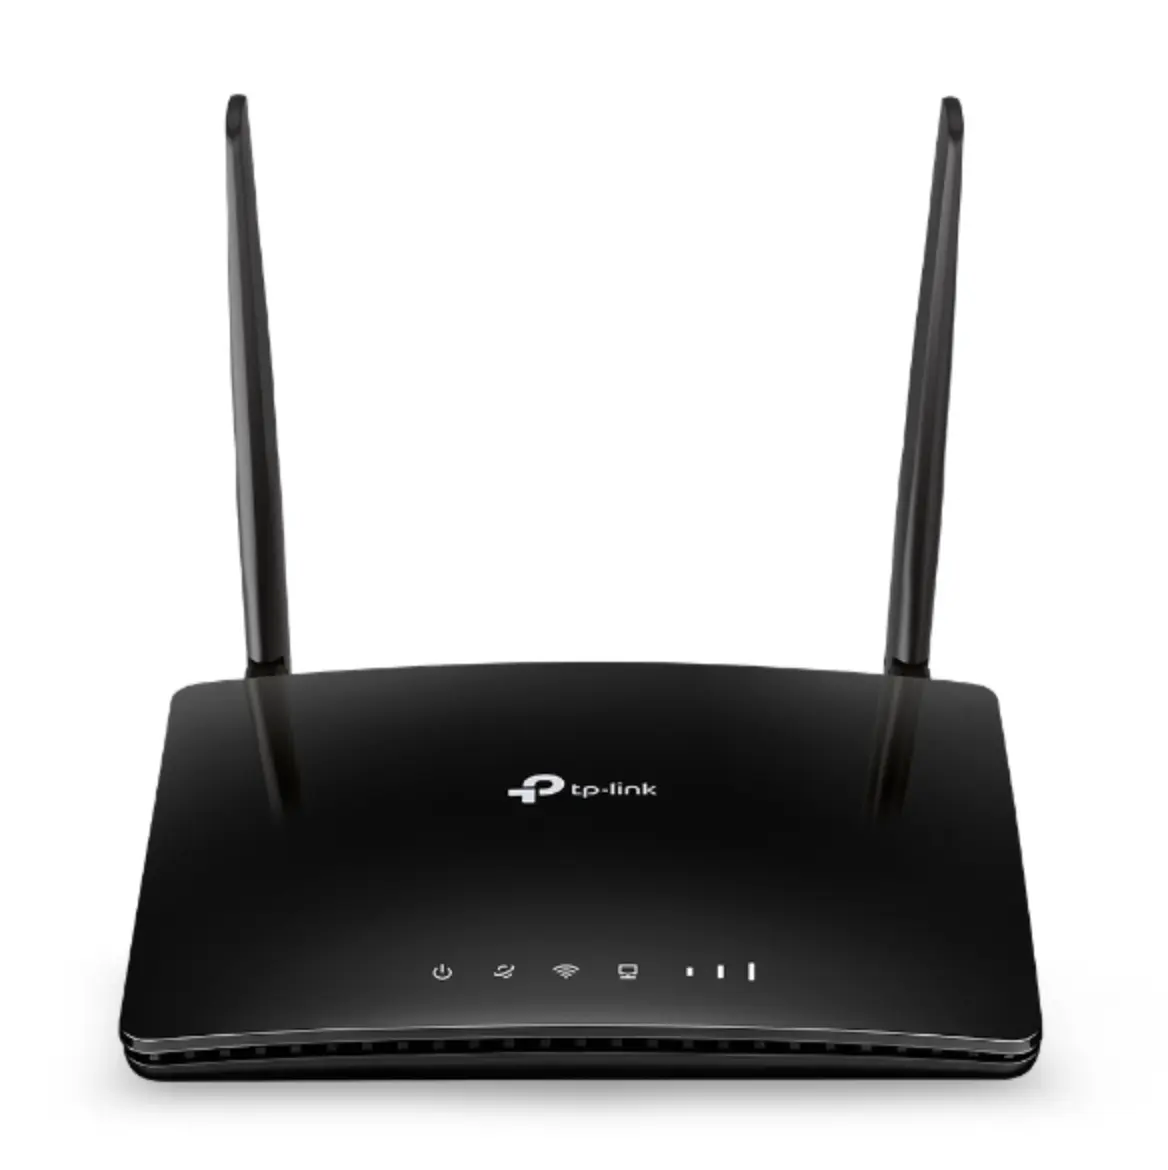 TP-LINK TL-MR6400 300 Mbps Draadloze N 4G Lte Router